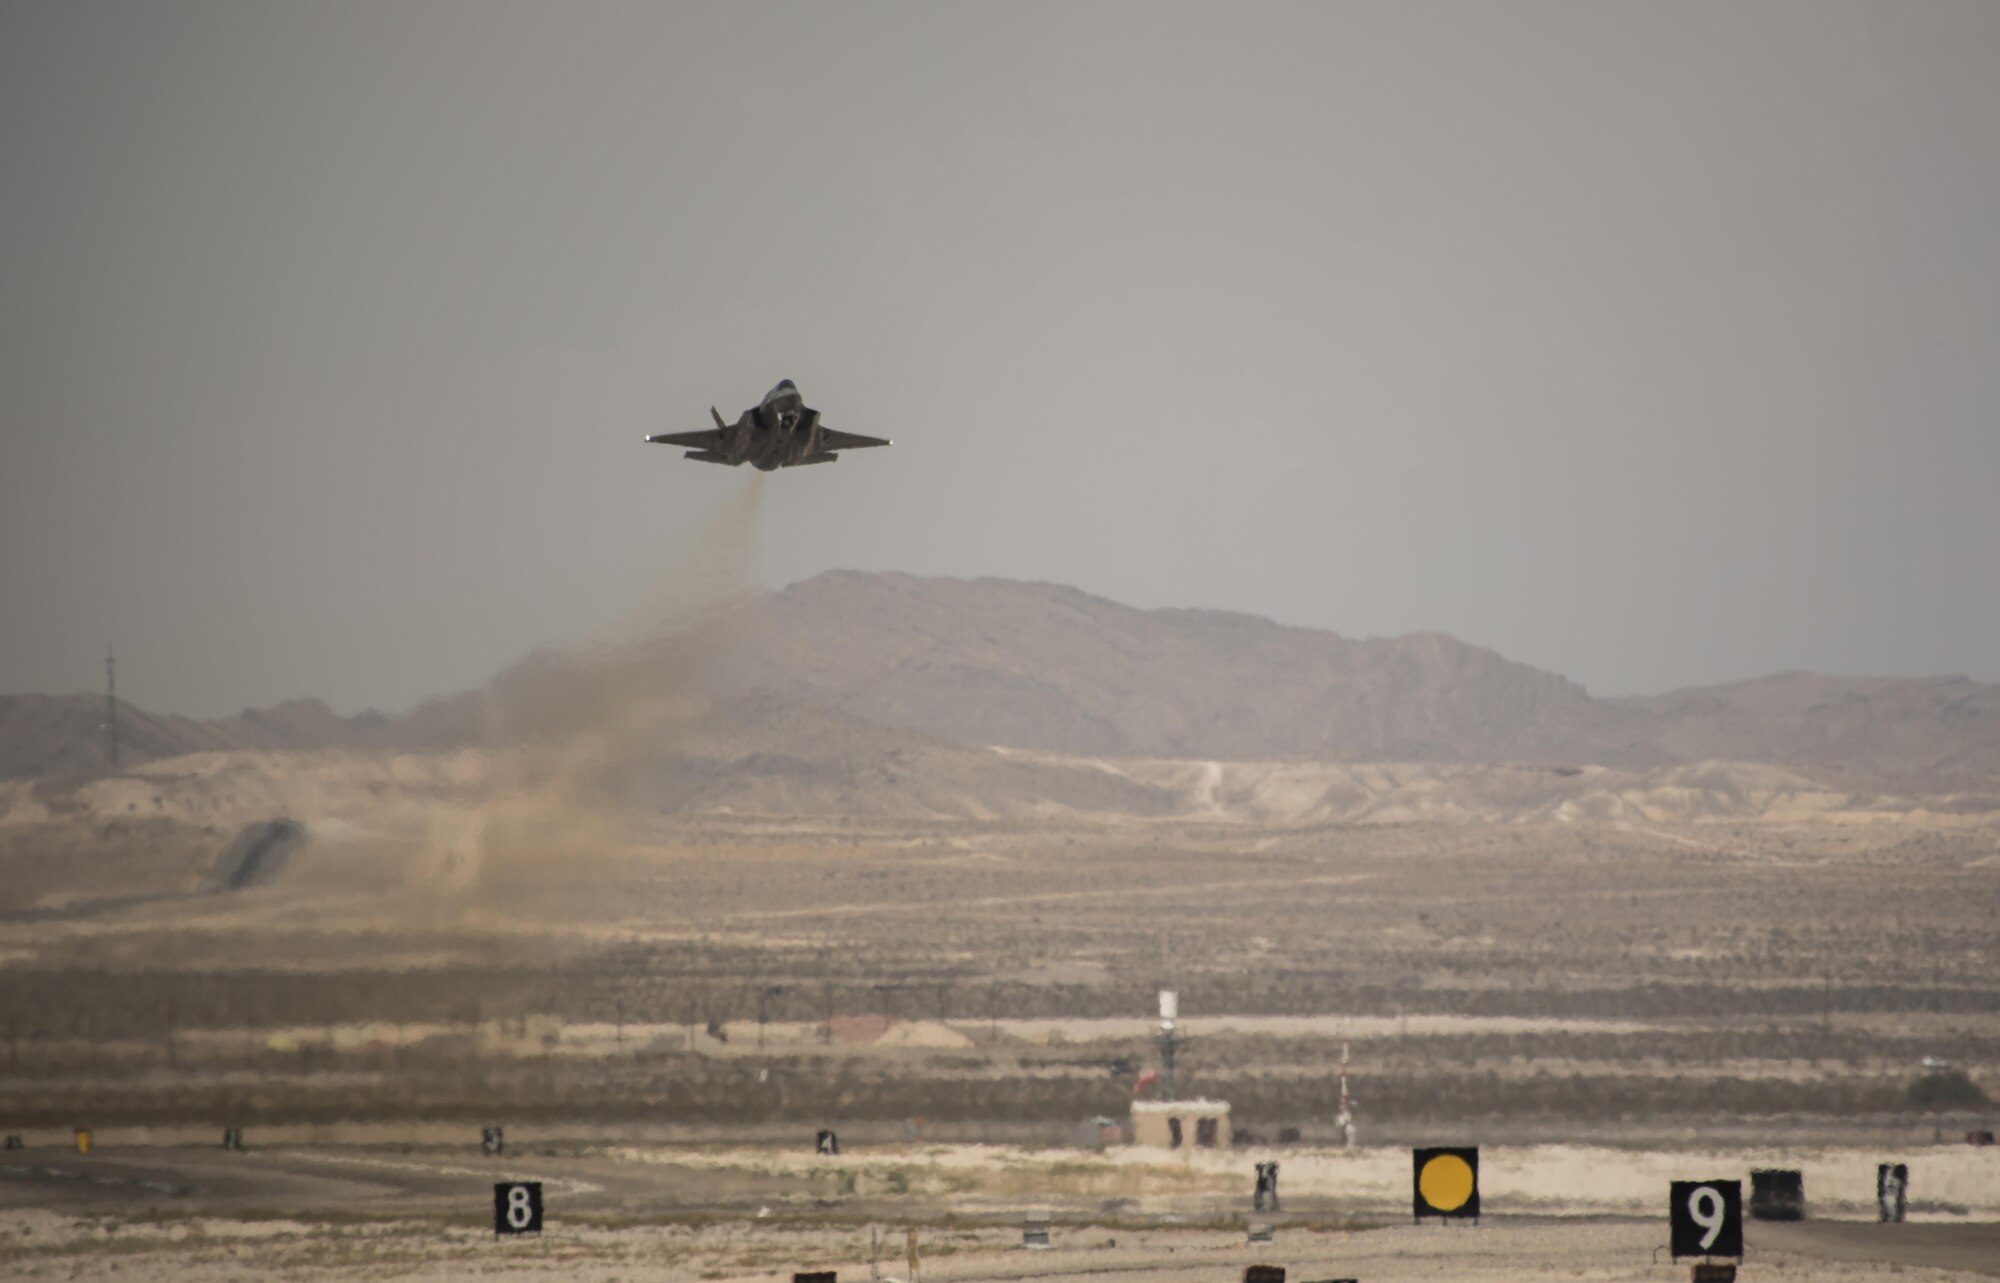 An F-35A Lightning II takes off July 18, 2017, at Nellis Air Force Base, Nev. The 33rd Fighter Wing and Marine Attack Squadron 221 from Yuma, Ariz., participated in the first combat exercise with Air Force F-35As and Marine Corps F-35Bs operating simultaneously during Red Flag 17-3. The large scale exercise, which was developed to provide pilots with critical experience in combat situations, enabled F-35 pilots to plan and train using the same tactics, techniques and procedures. (U.S. Air Force photo by Staff Sgt. Peter Thompson)